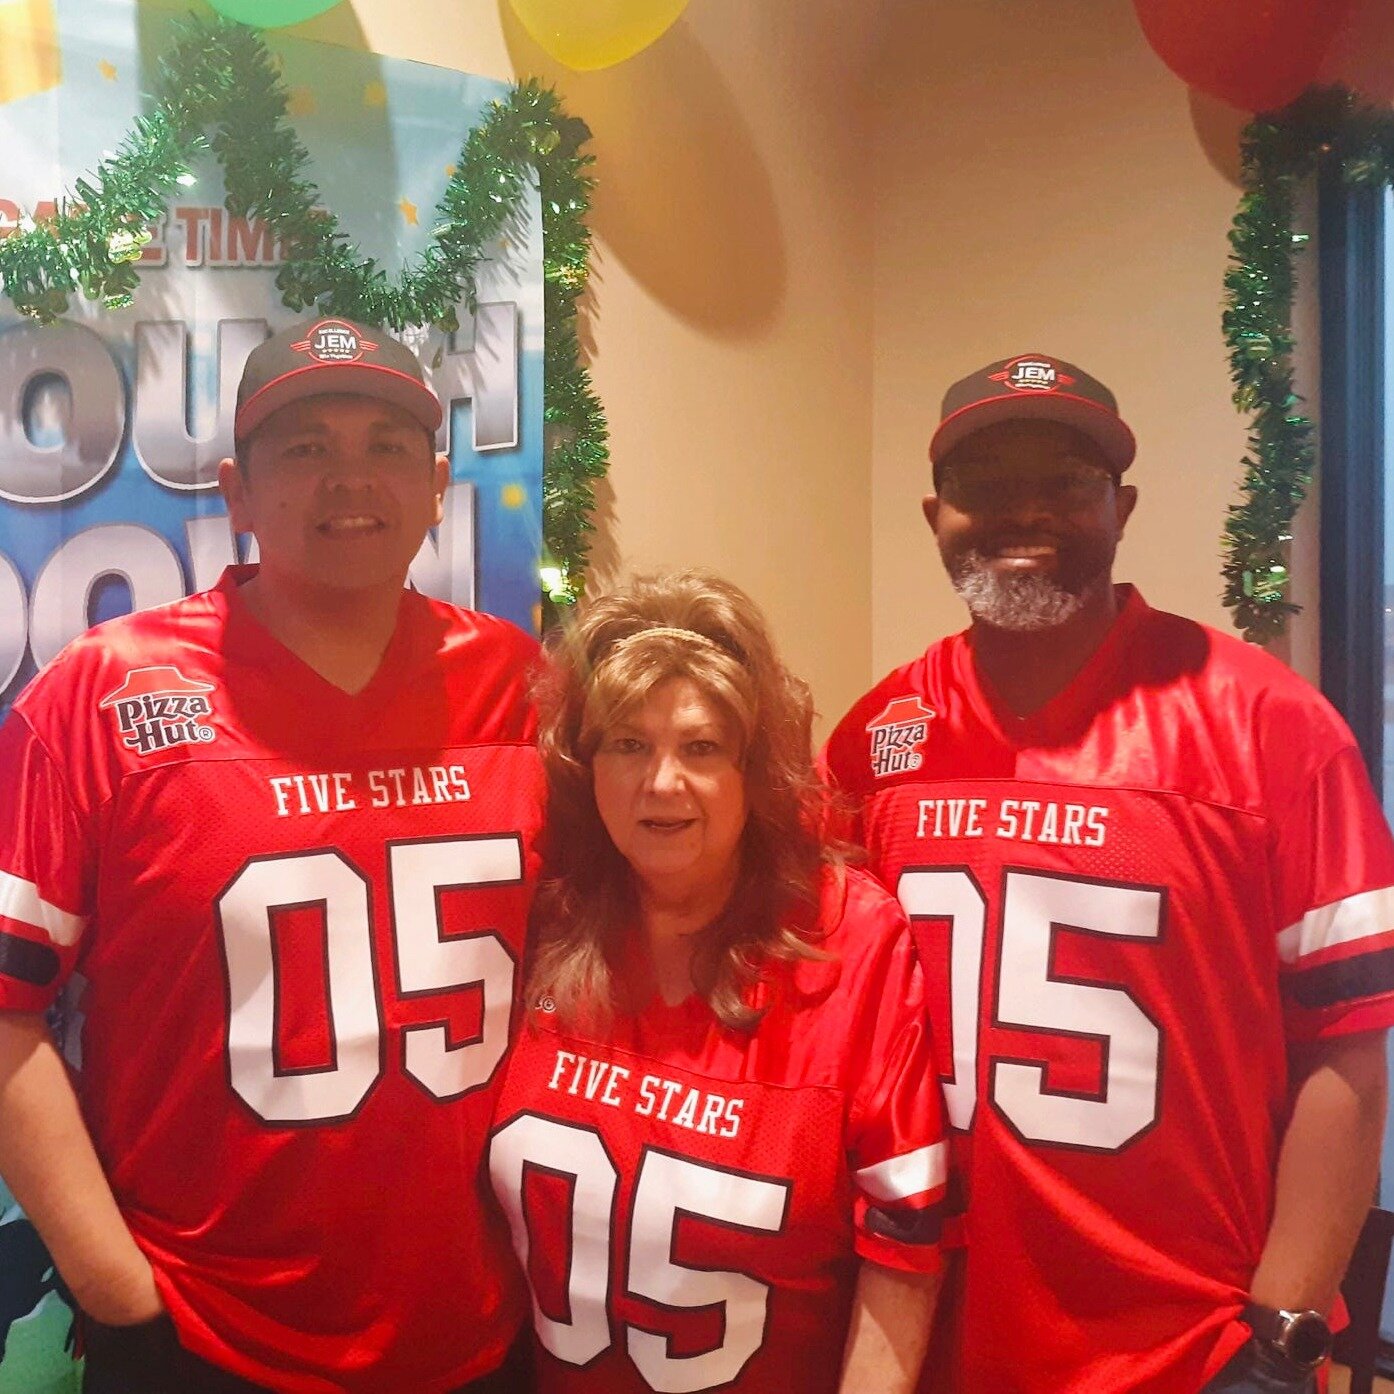 Daniel, Deb, and Randy celebrating Super Bowl with the teams!
#pizzahut #recognition